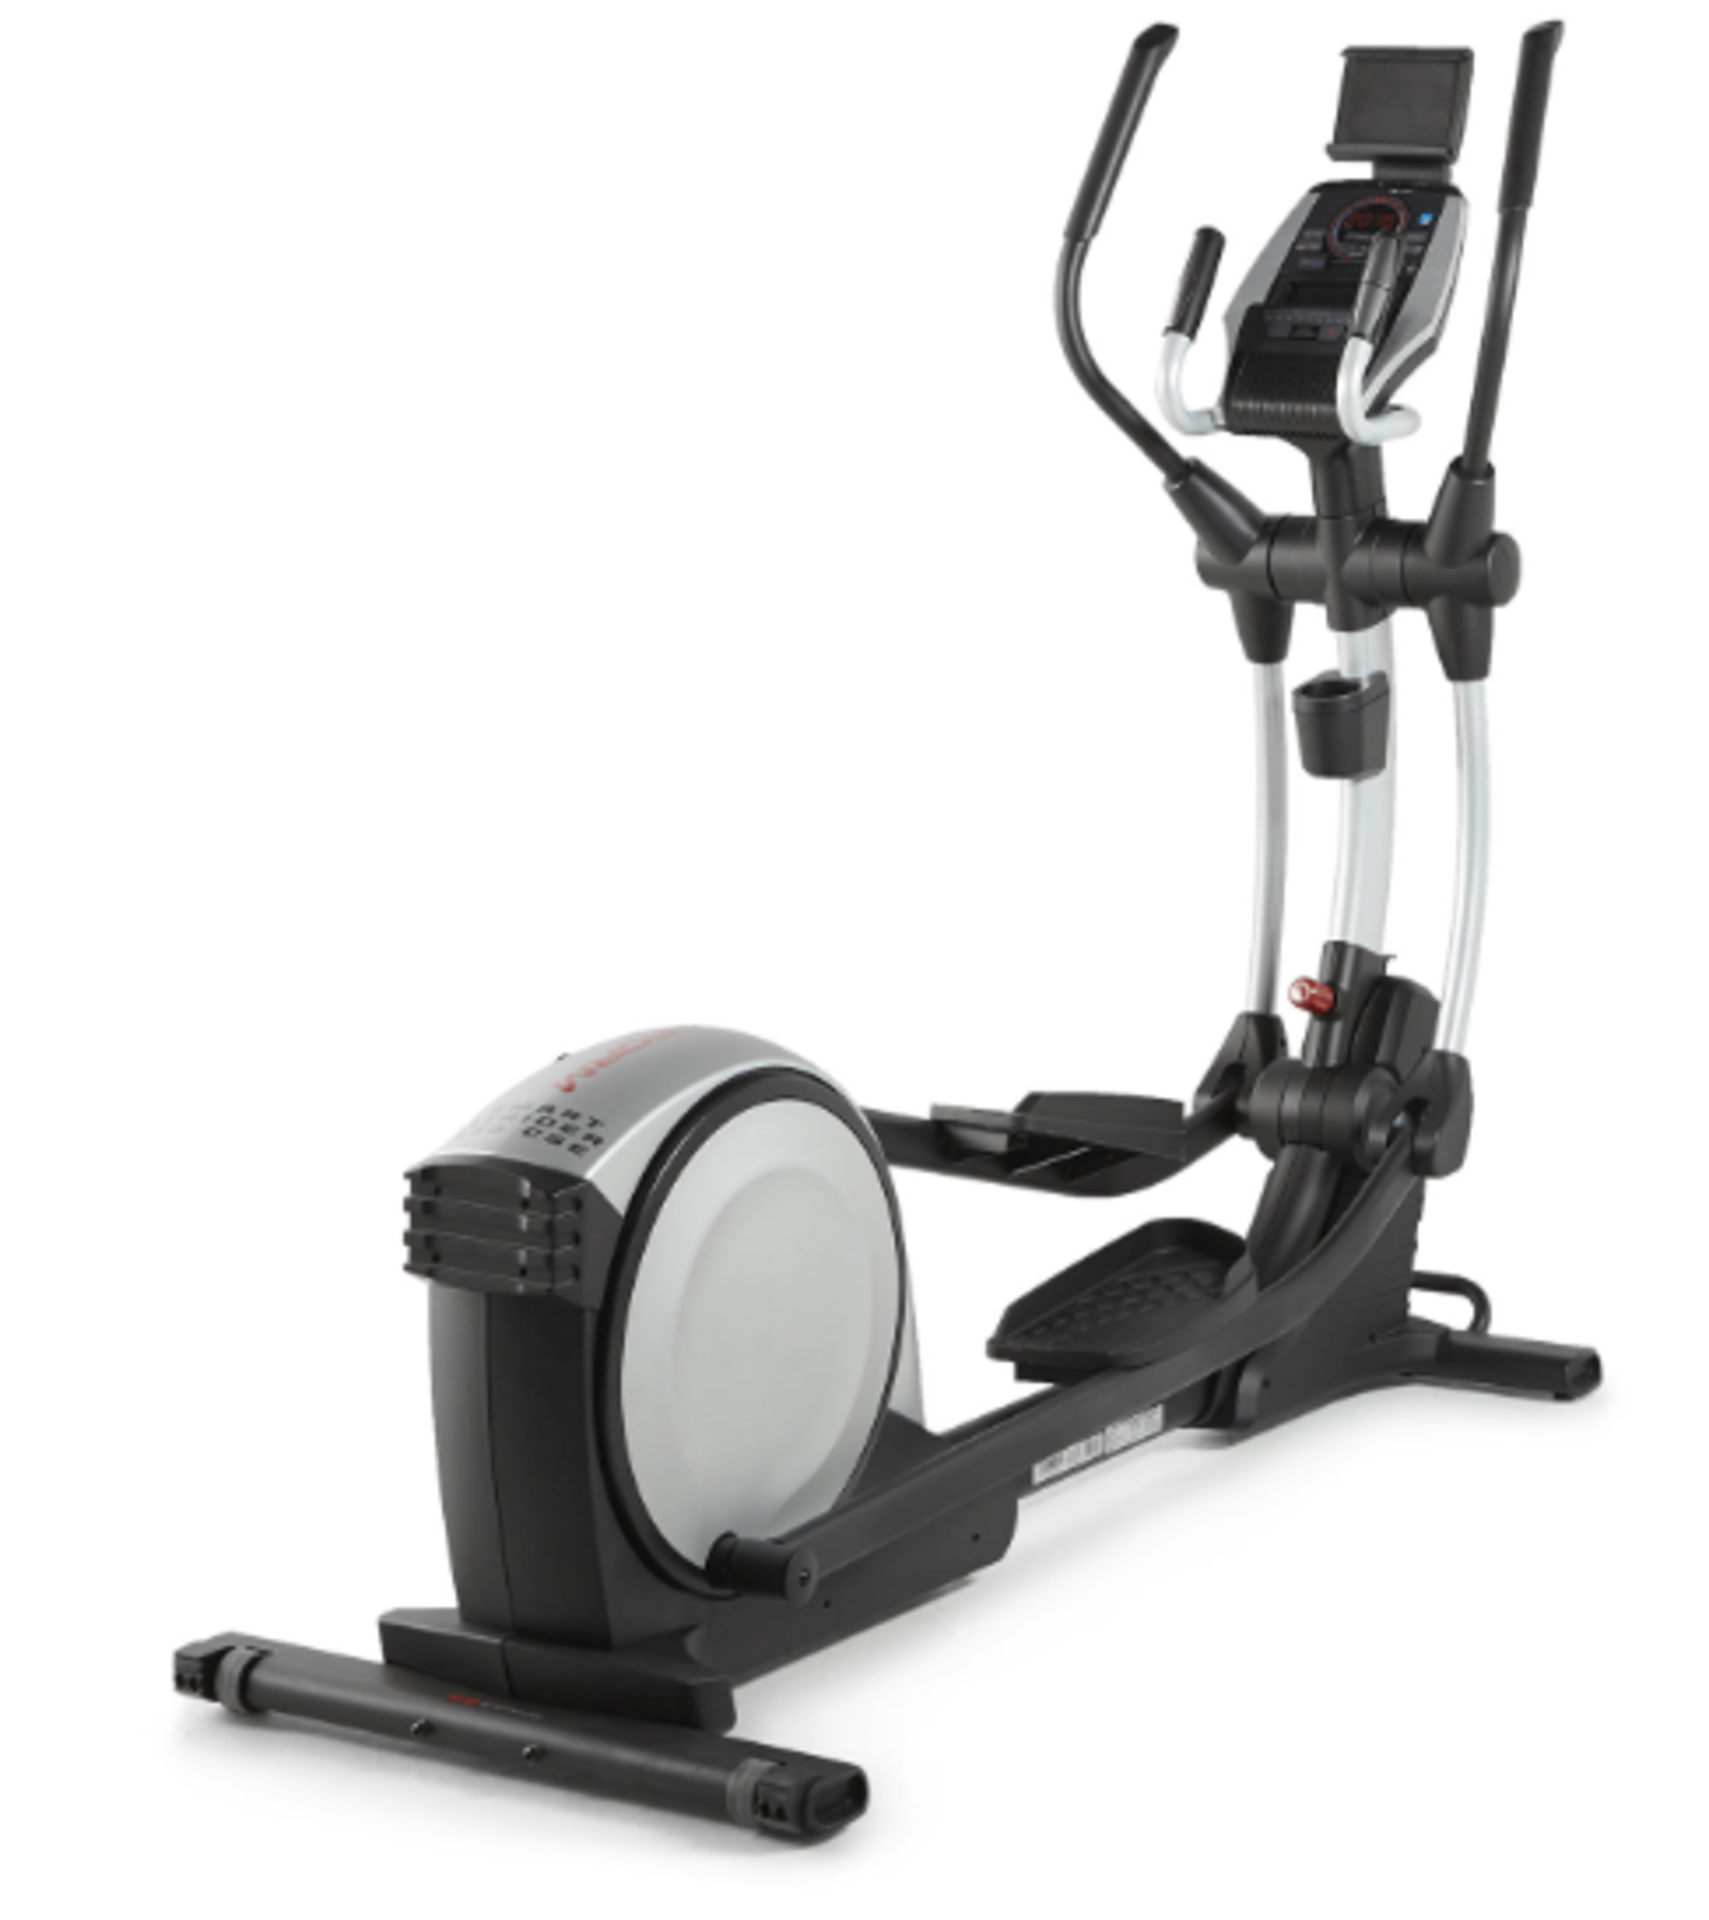 Pro-Form - Smart Strider 495 CSE Elliptical Trainer - Untested, Assembled - No Packaging - Viewing